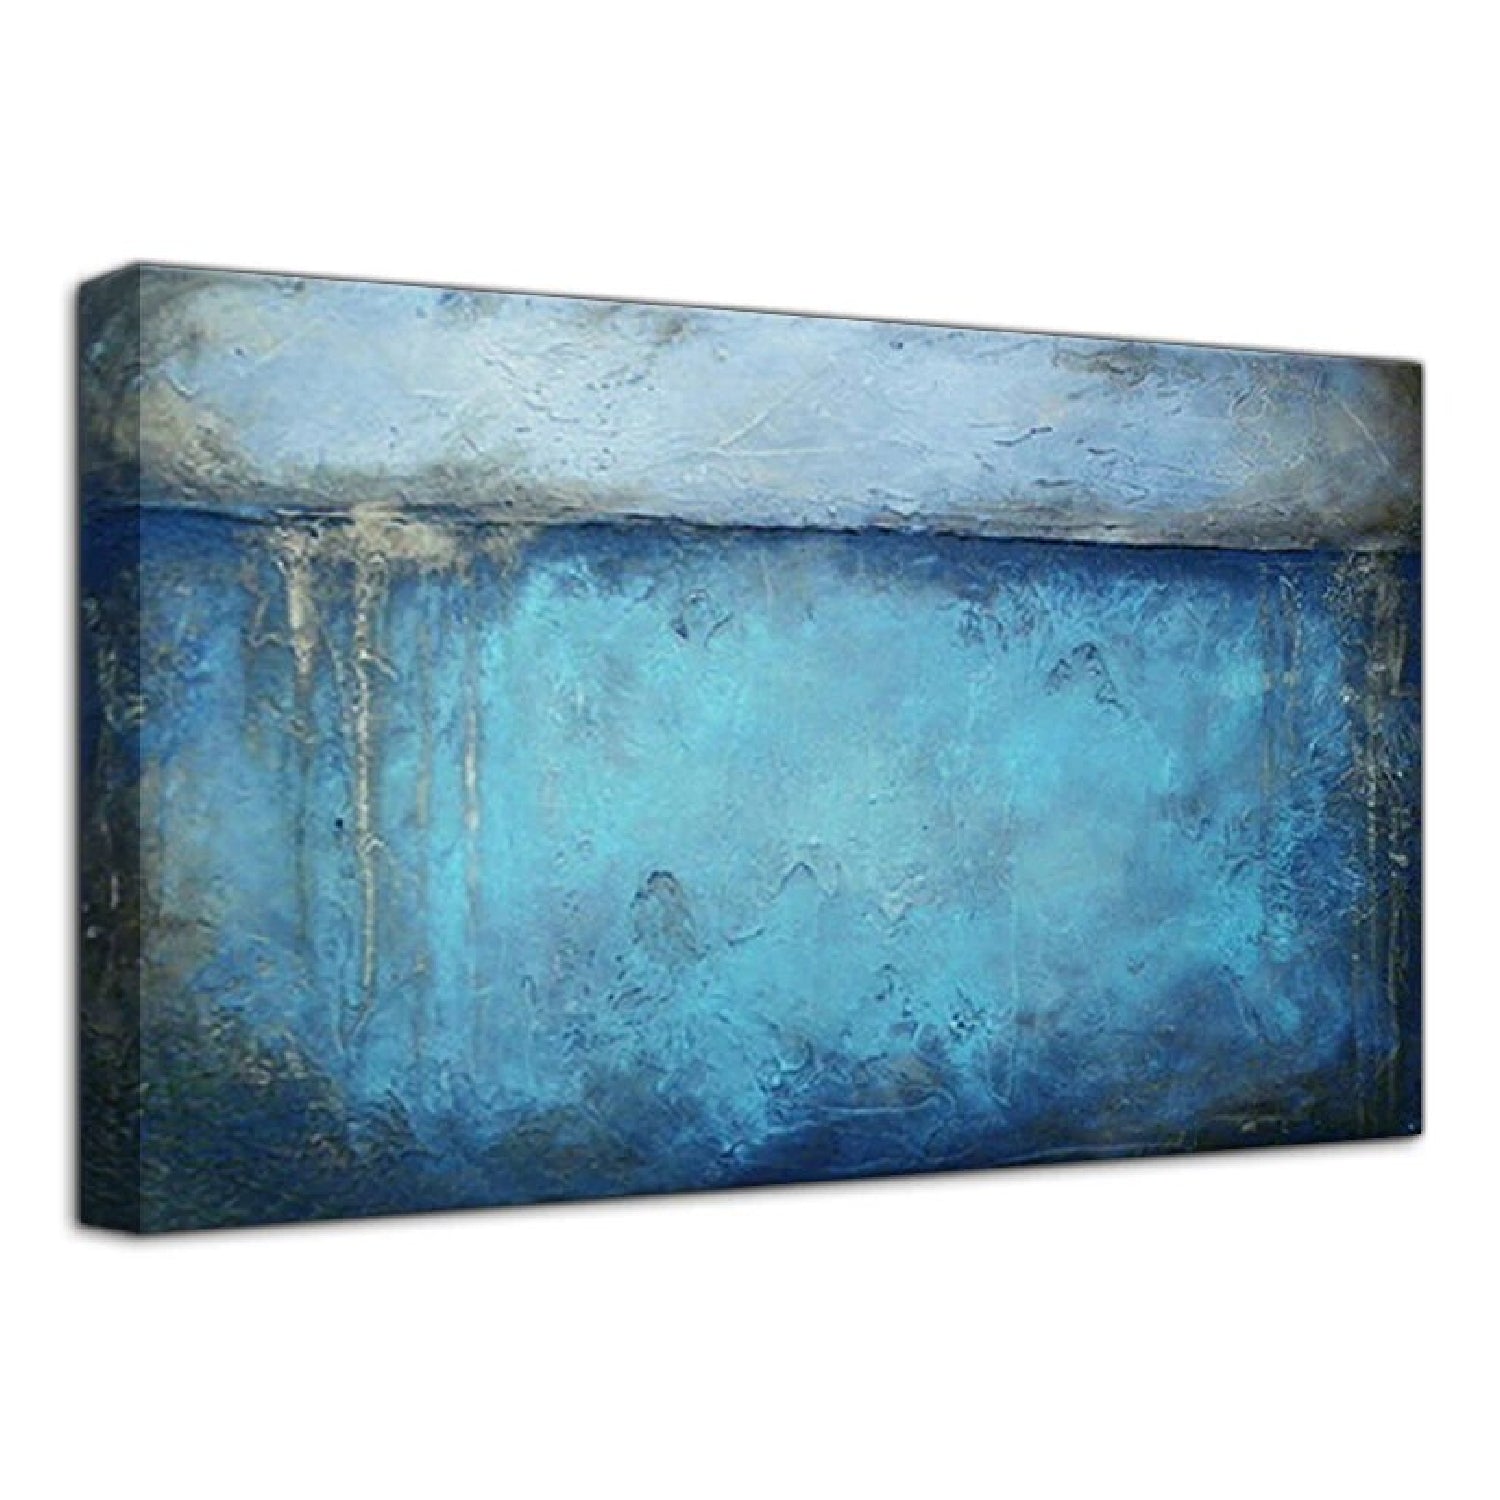 Modern Abstract Blue Textured Mural Painting